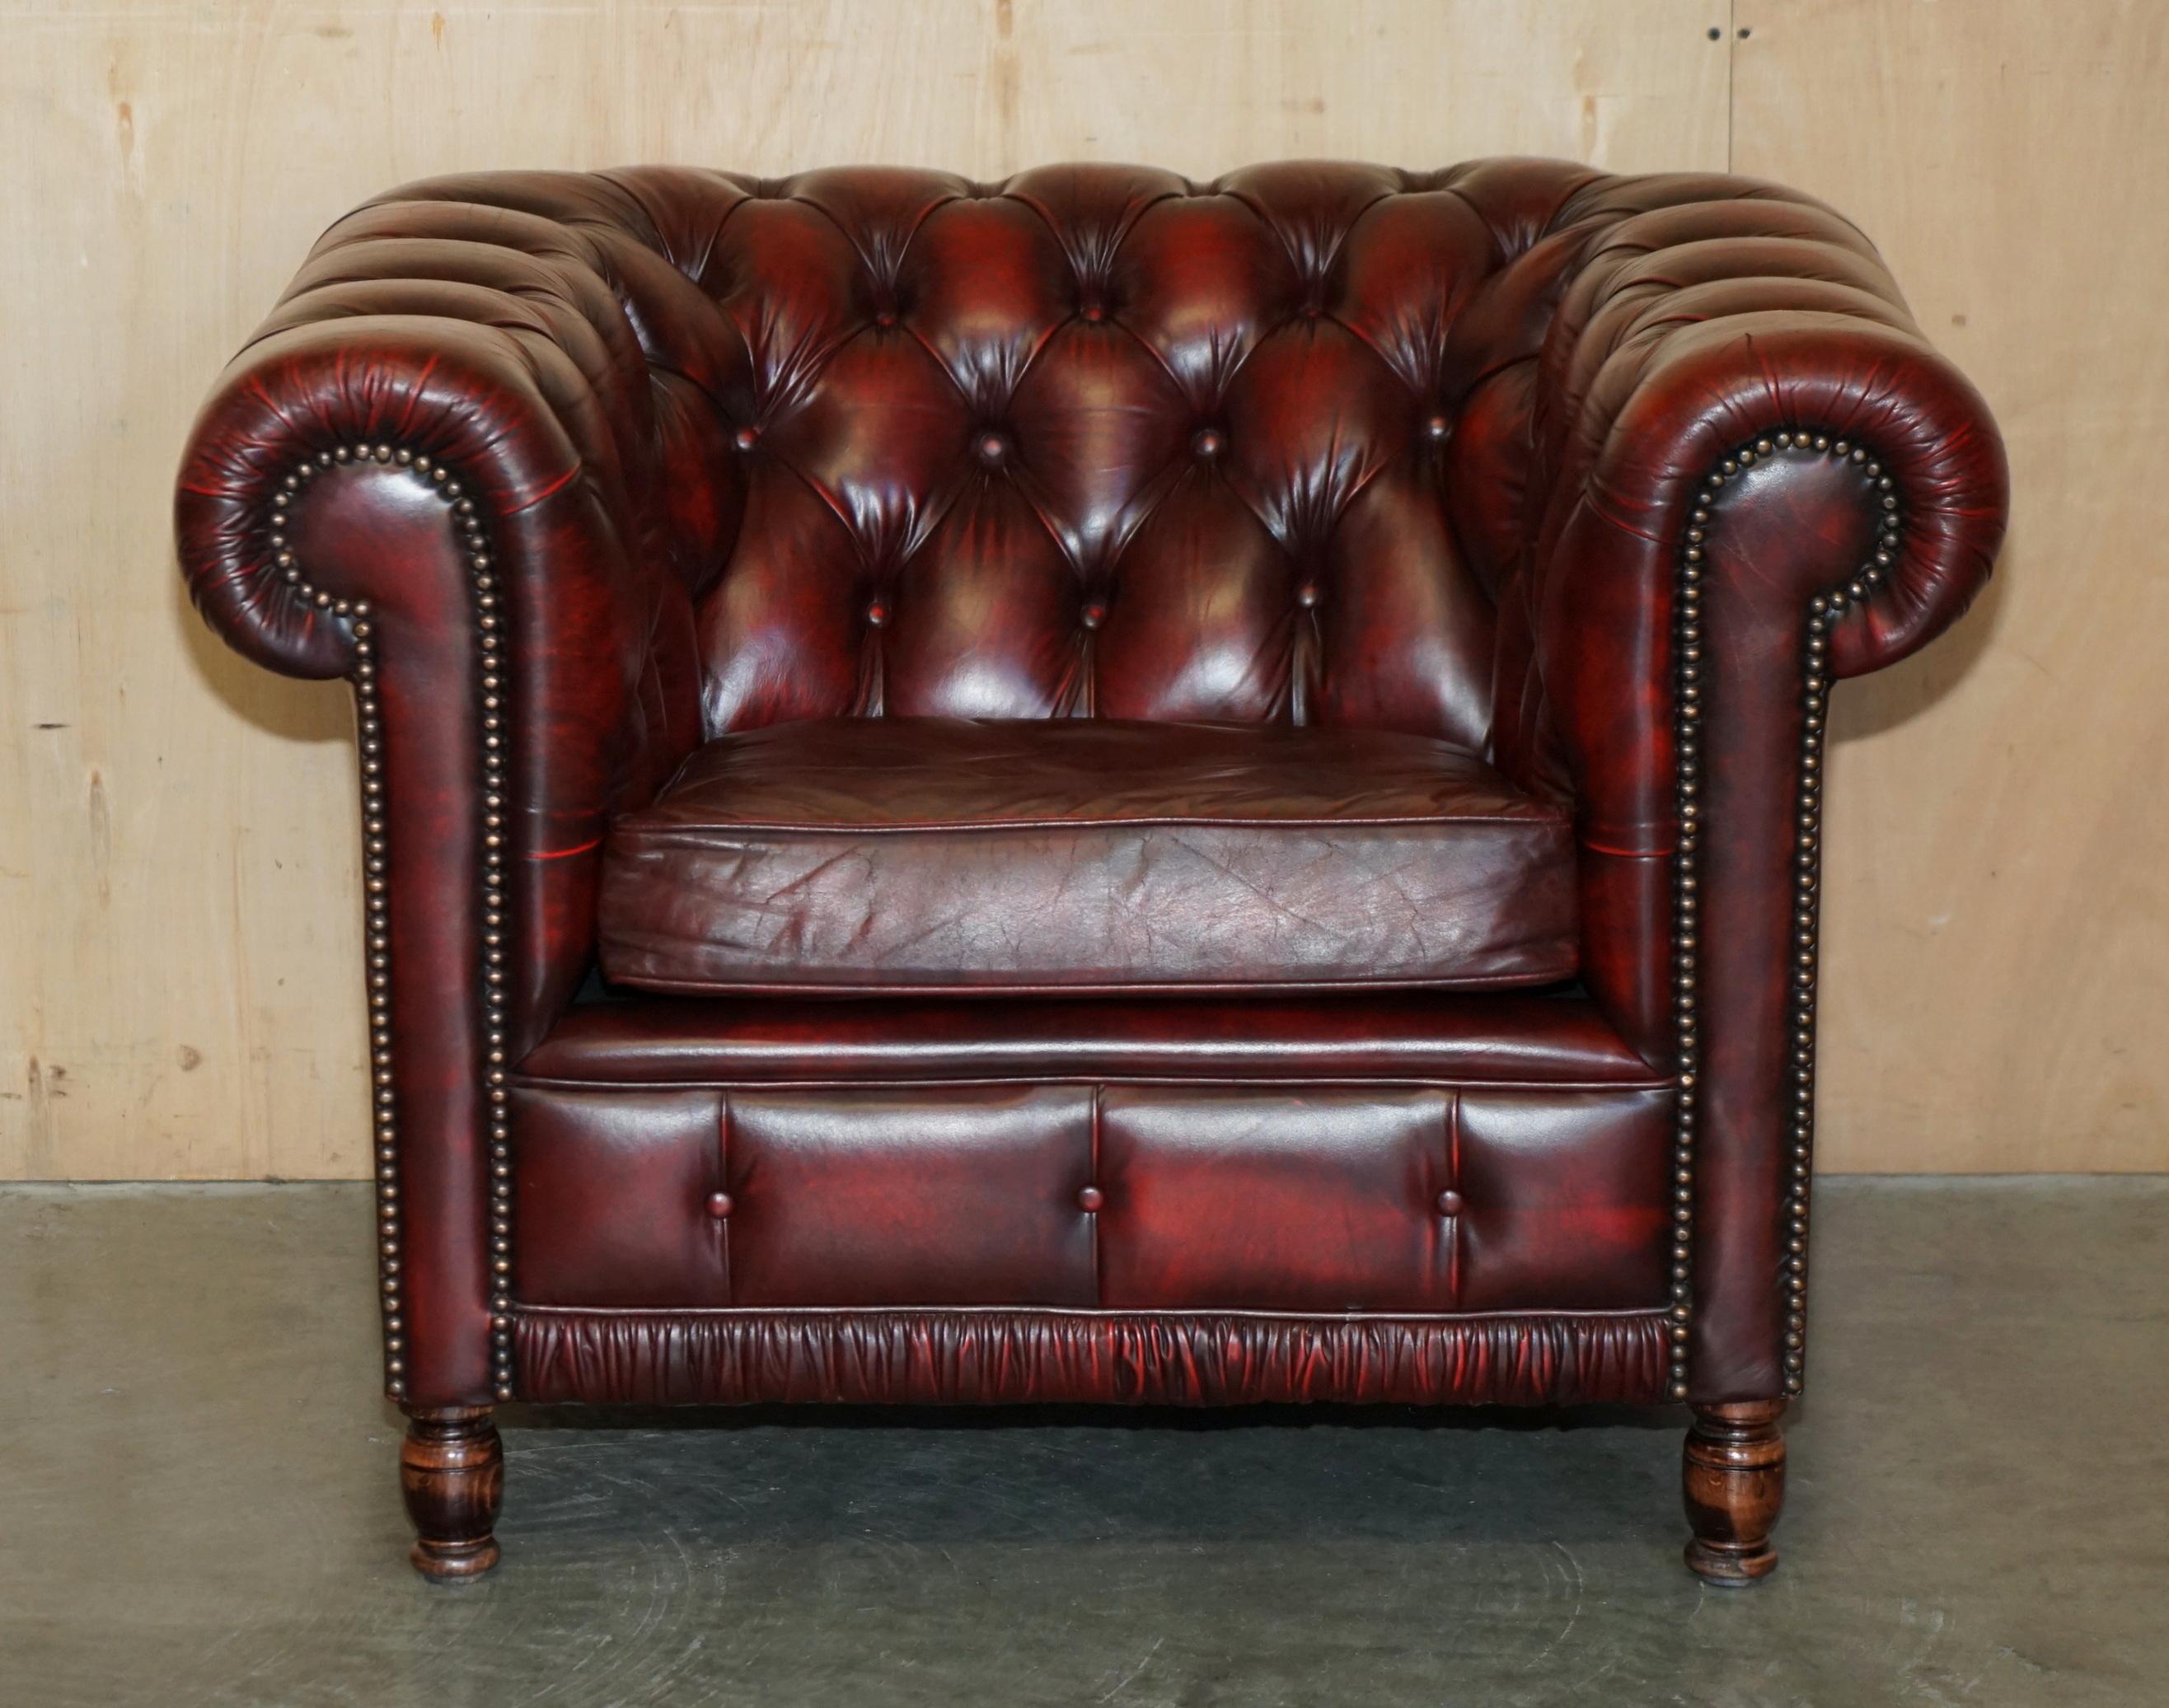 Chesterfield PAIR OF ViNTAGE OXBLOOD LEATHER CHESTERFIELD CLUB ARMCHAIRS WITH ELEGANT LEGS